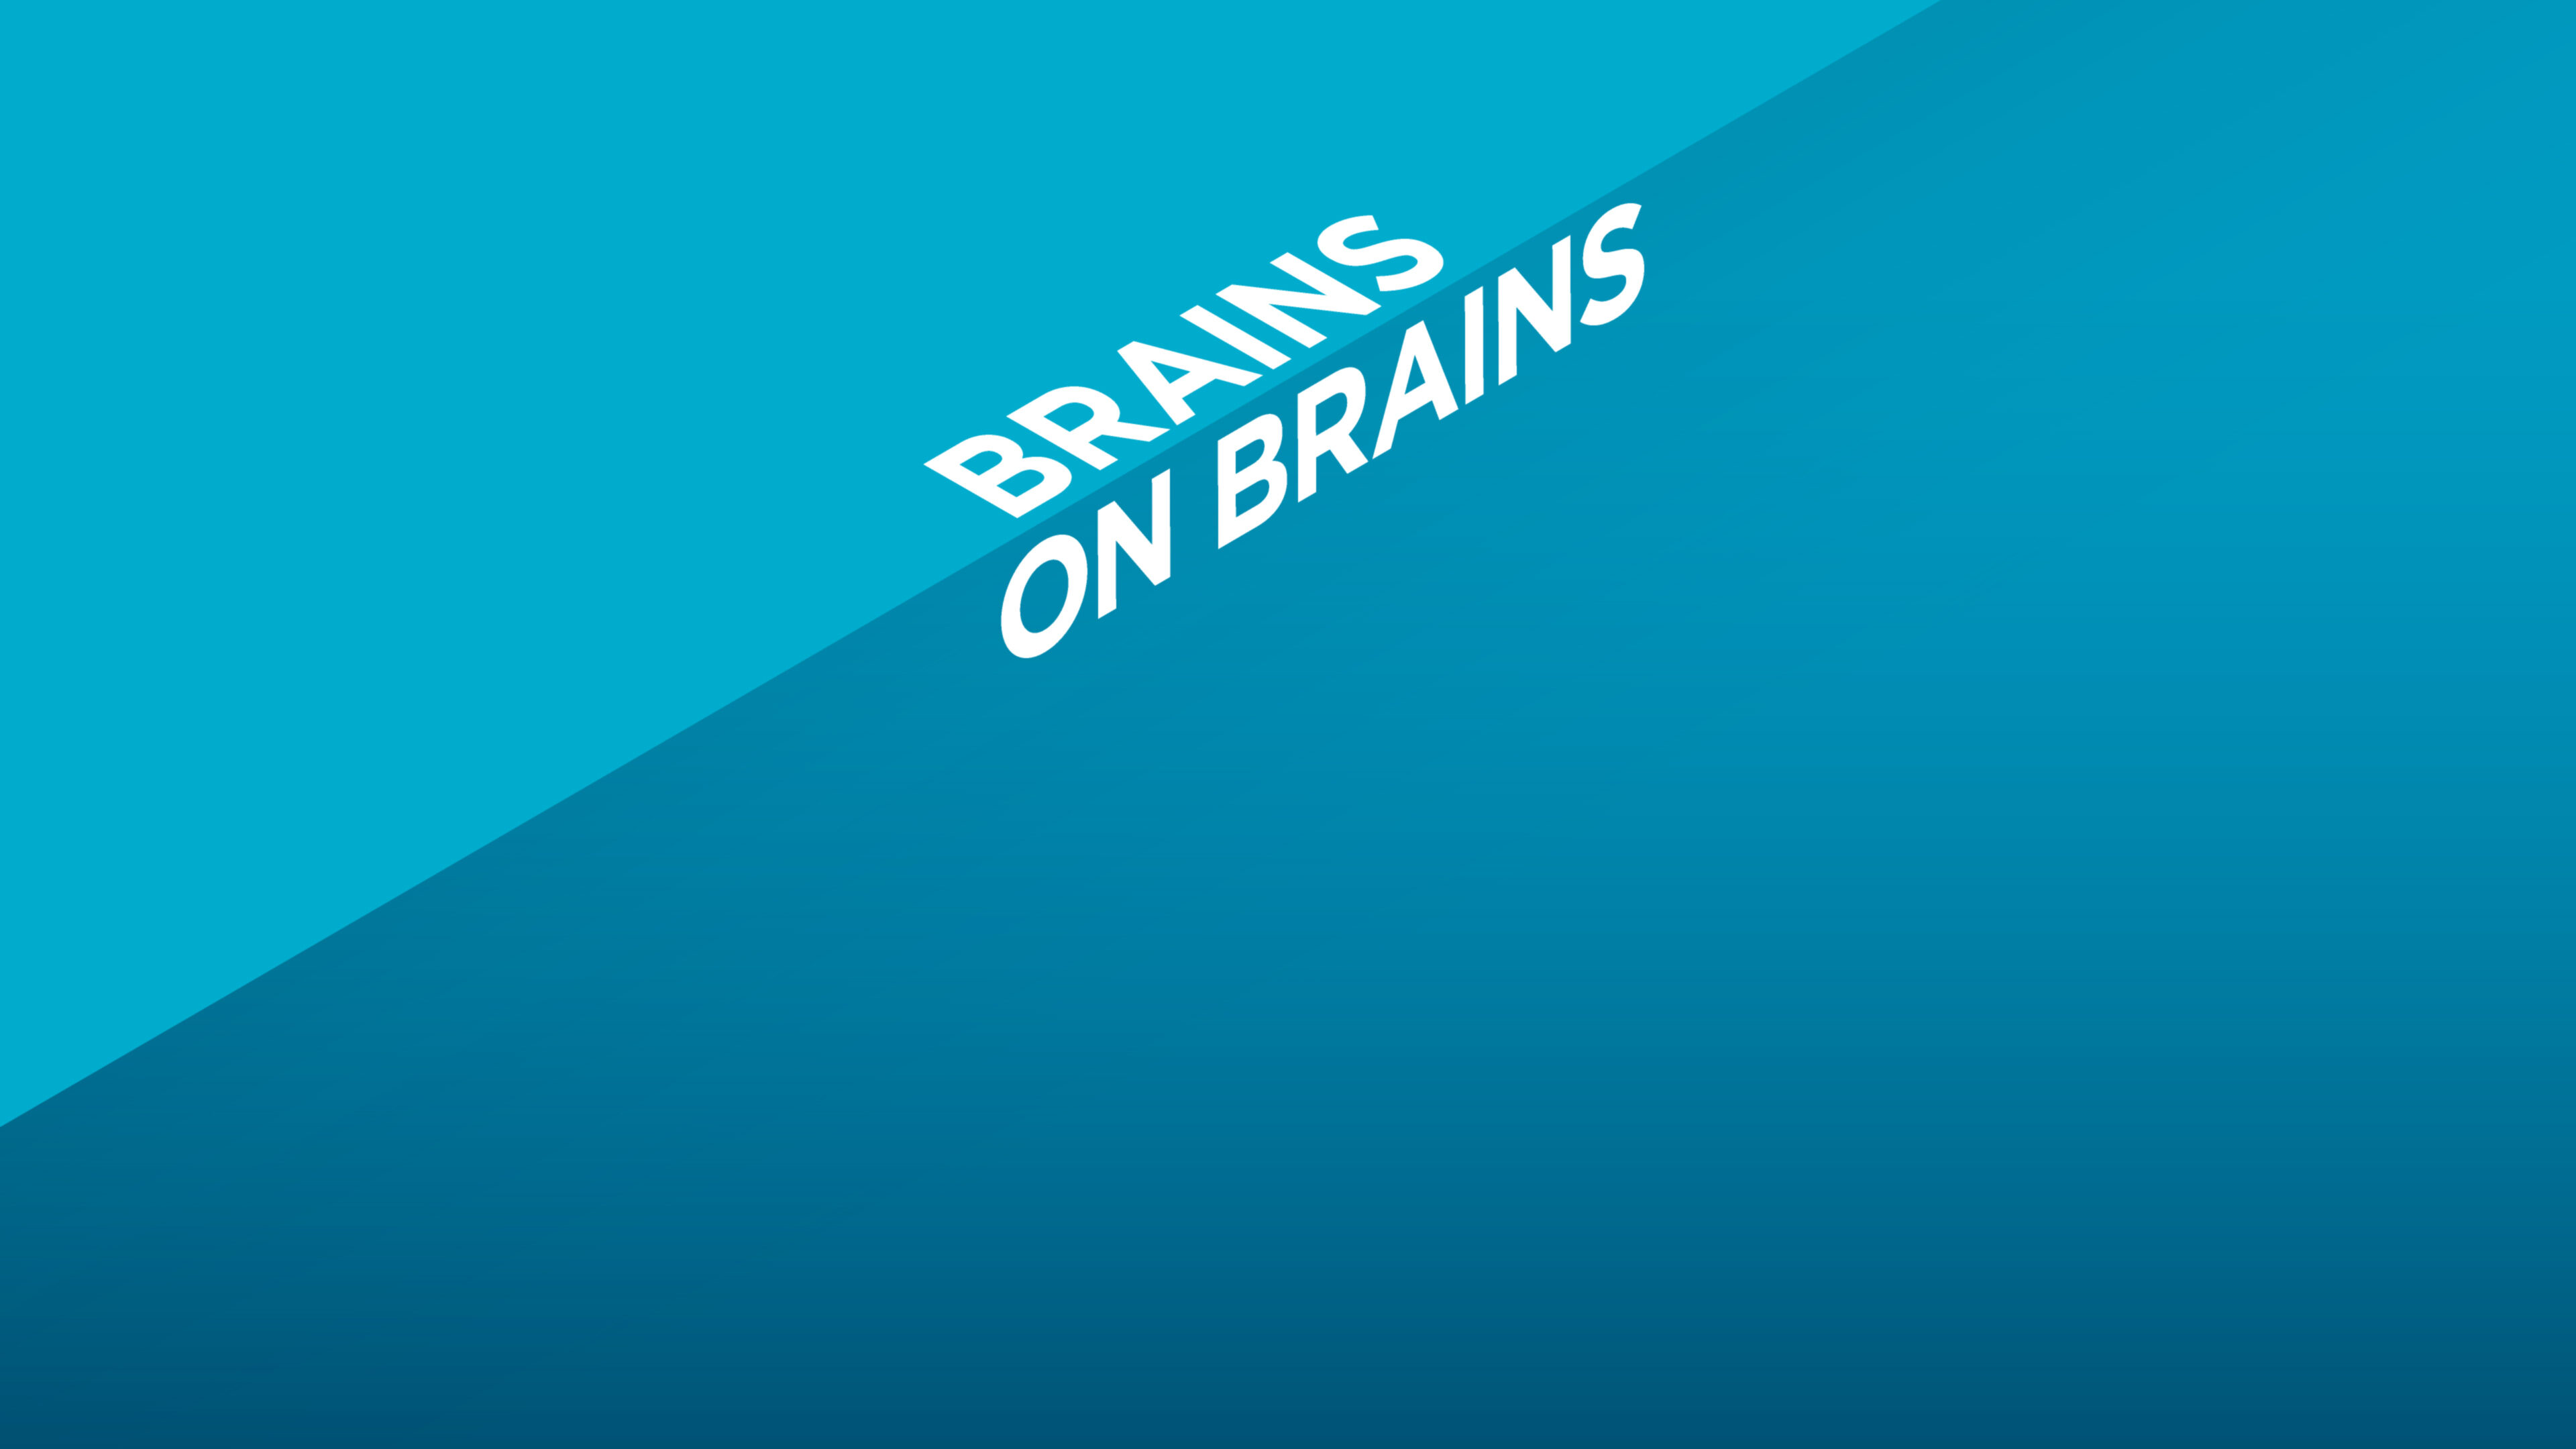 "Brains on brains" is uppercase, riding along a shadow edge and a full-bleed background.